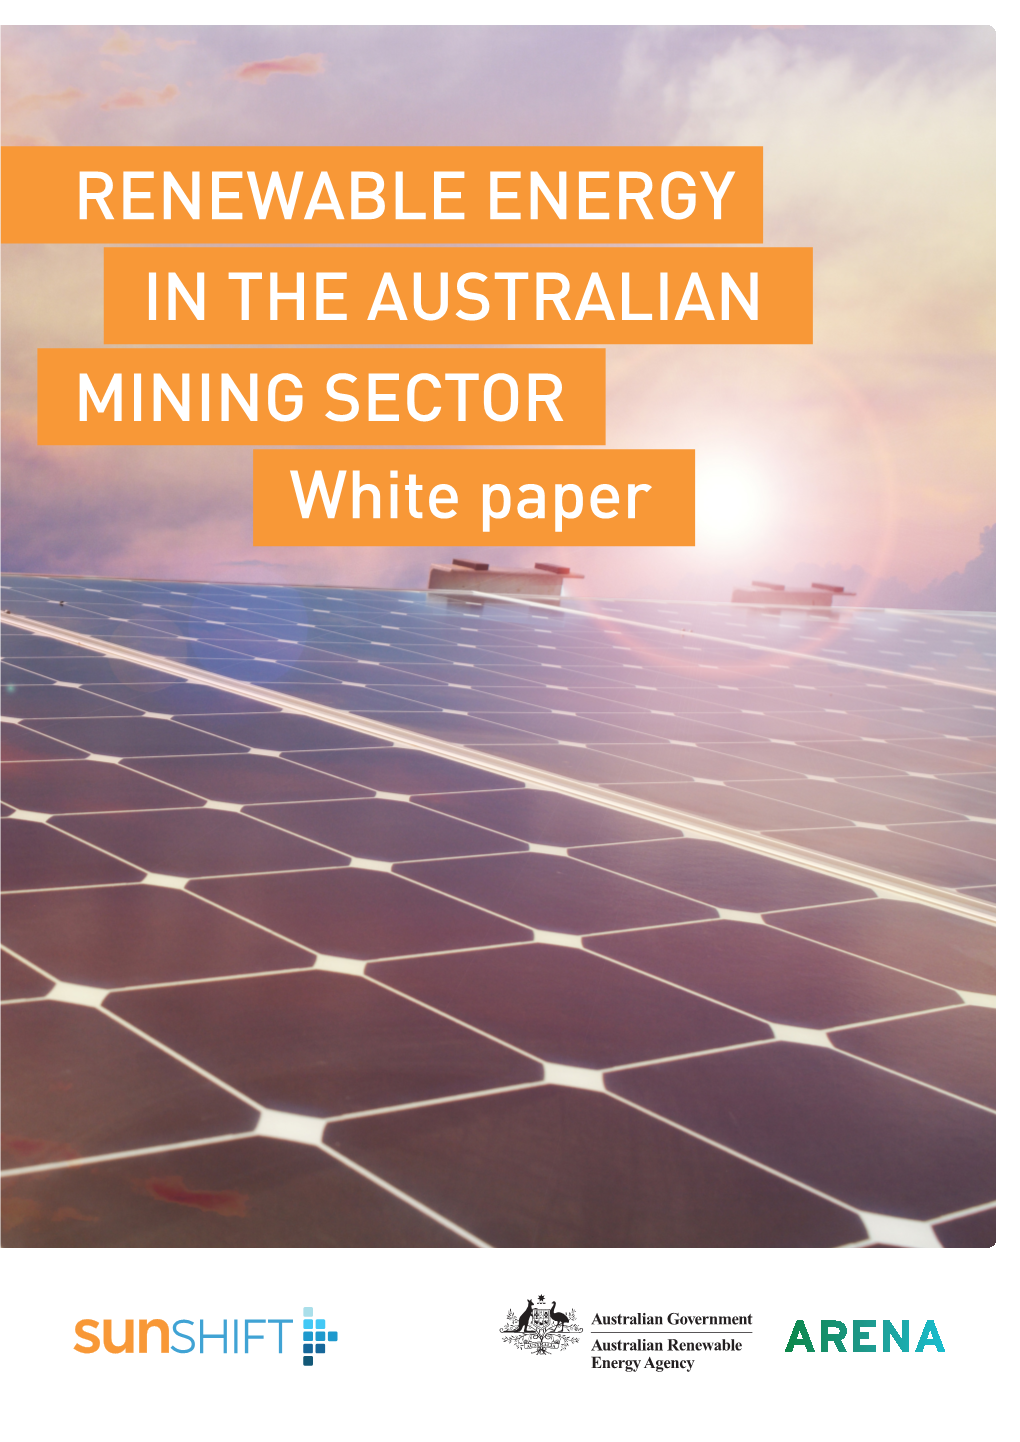 RENEWABLE ENERGY in the AUSTRALIAN MINING SECTOR White Paper All Currencies Are Provided in Australian Dollars